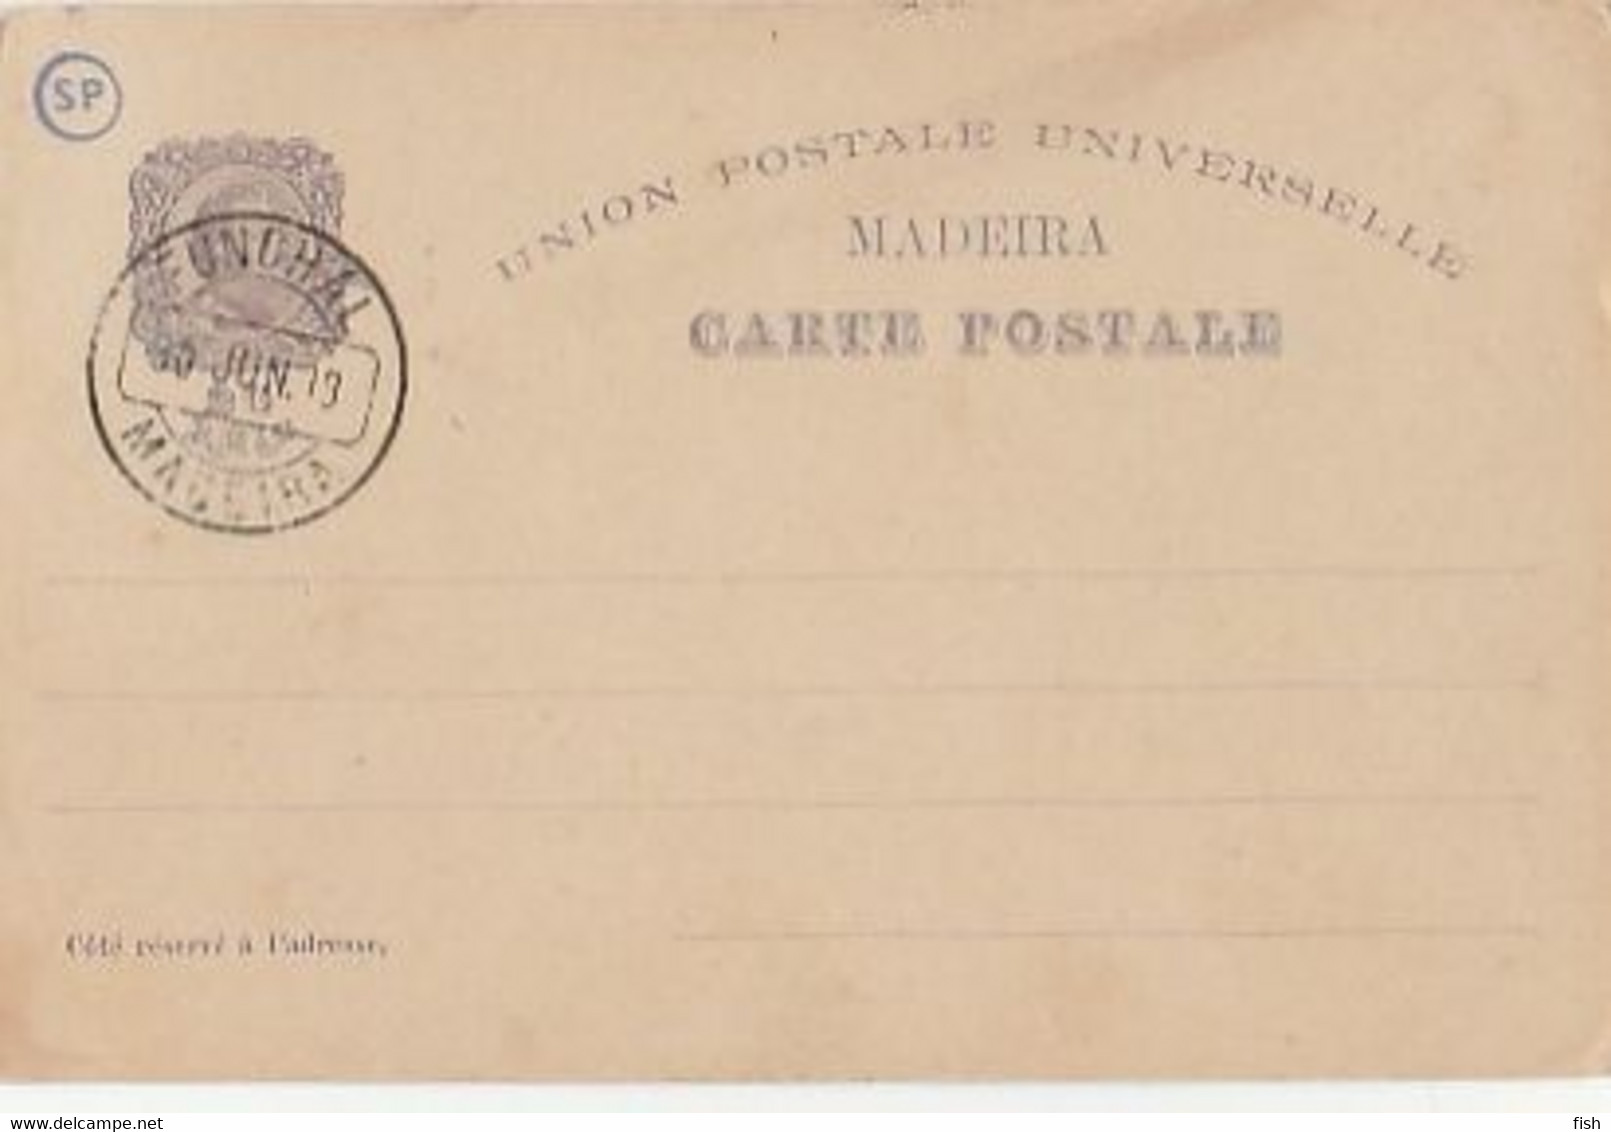 Portugal & Bilhete Postal, Overseas Africa, Centenary Of India, Cathedral Of Lisbon, Madeira, Funchal 1898 (2514) - Funchal